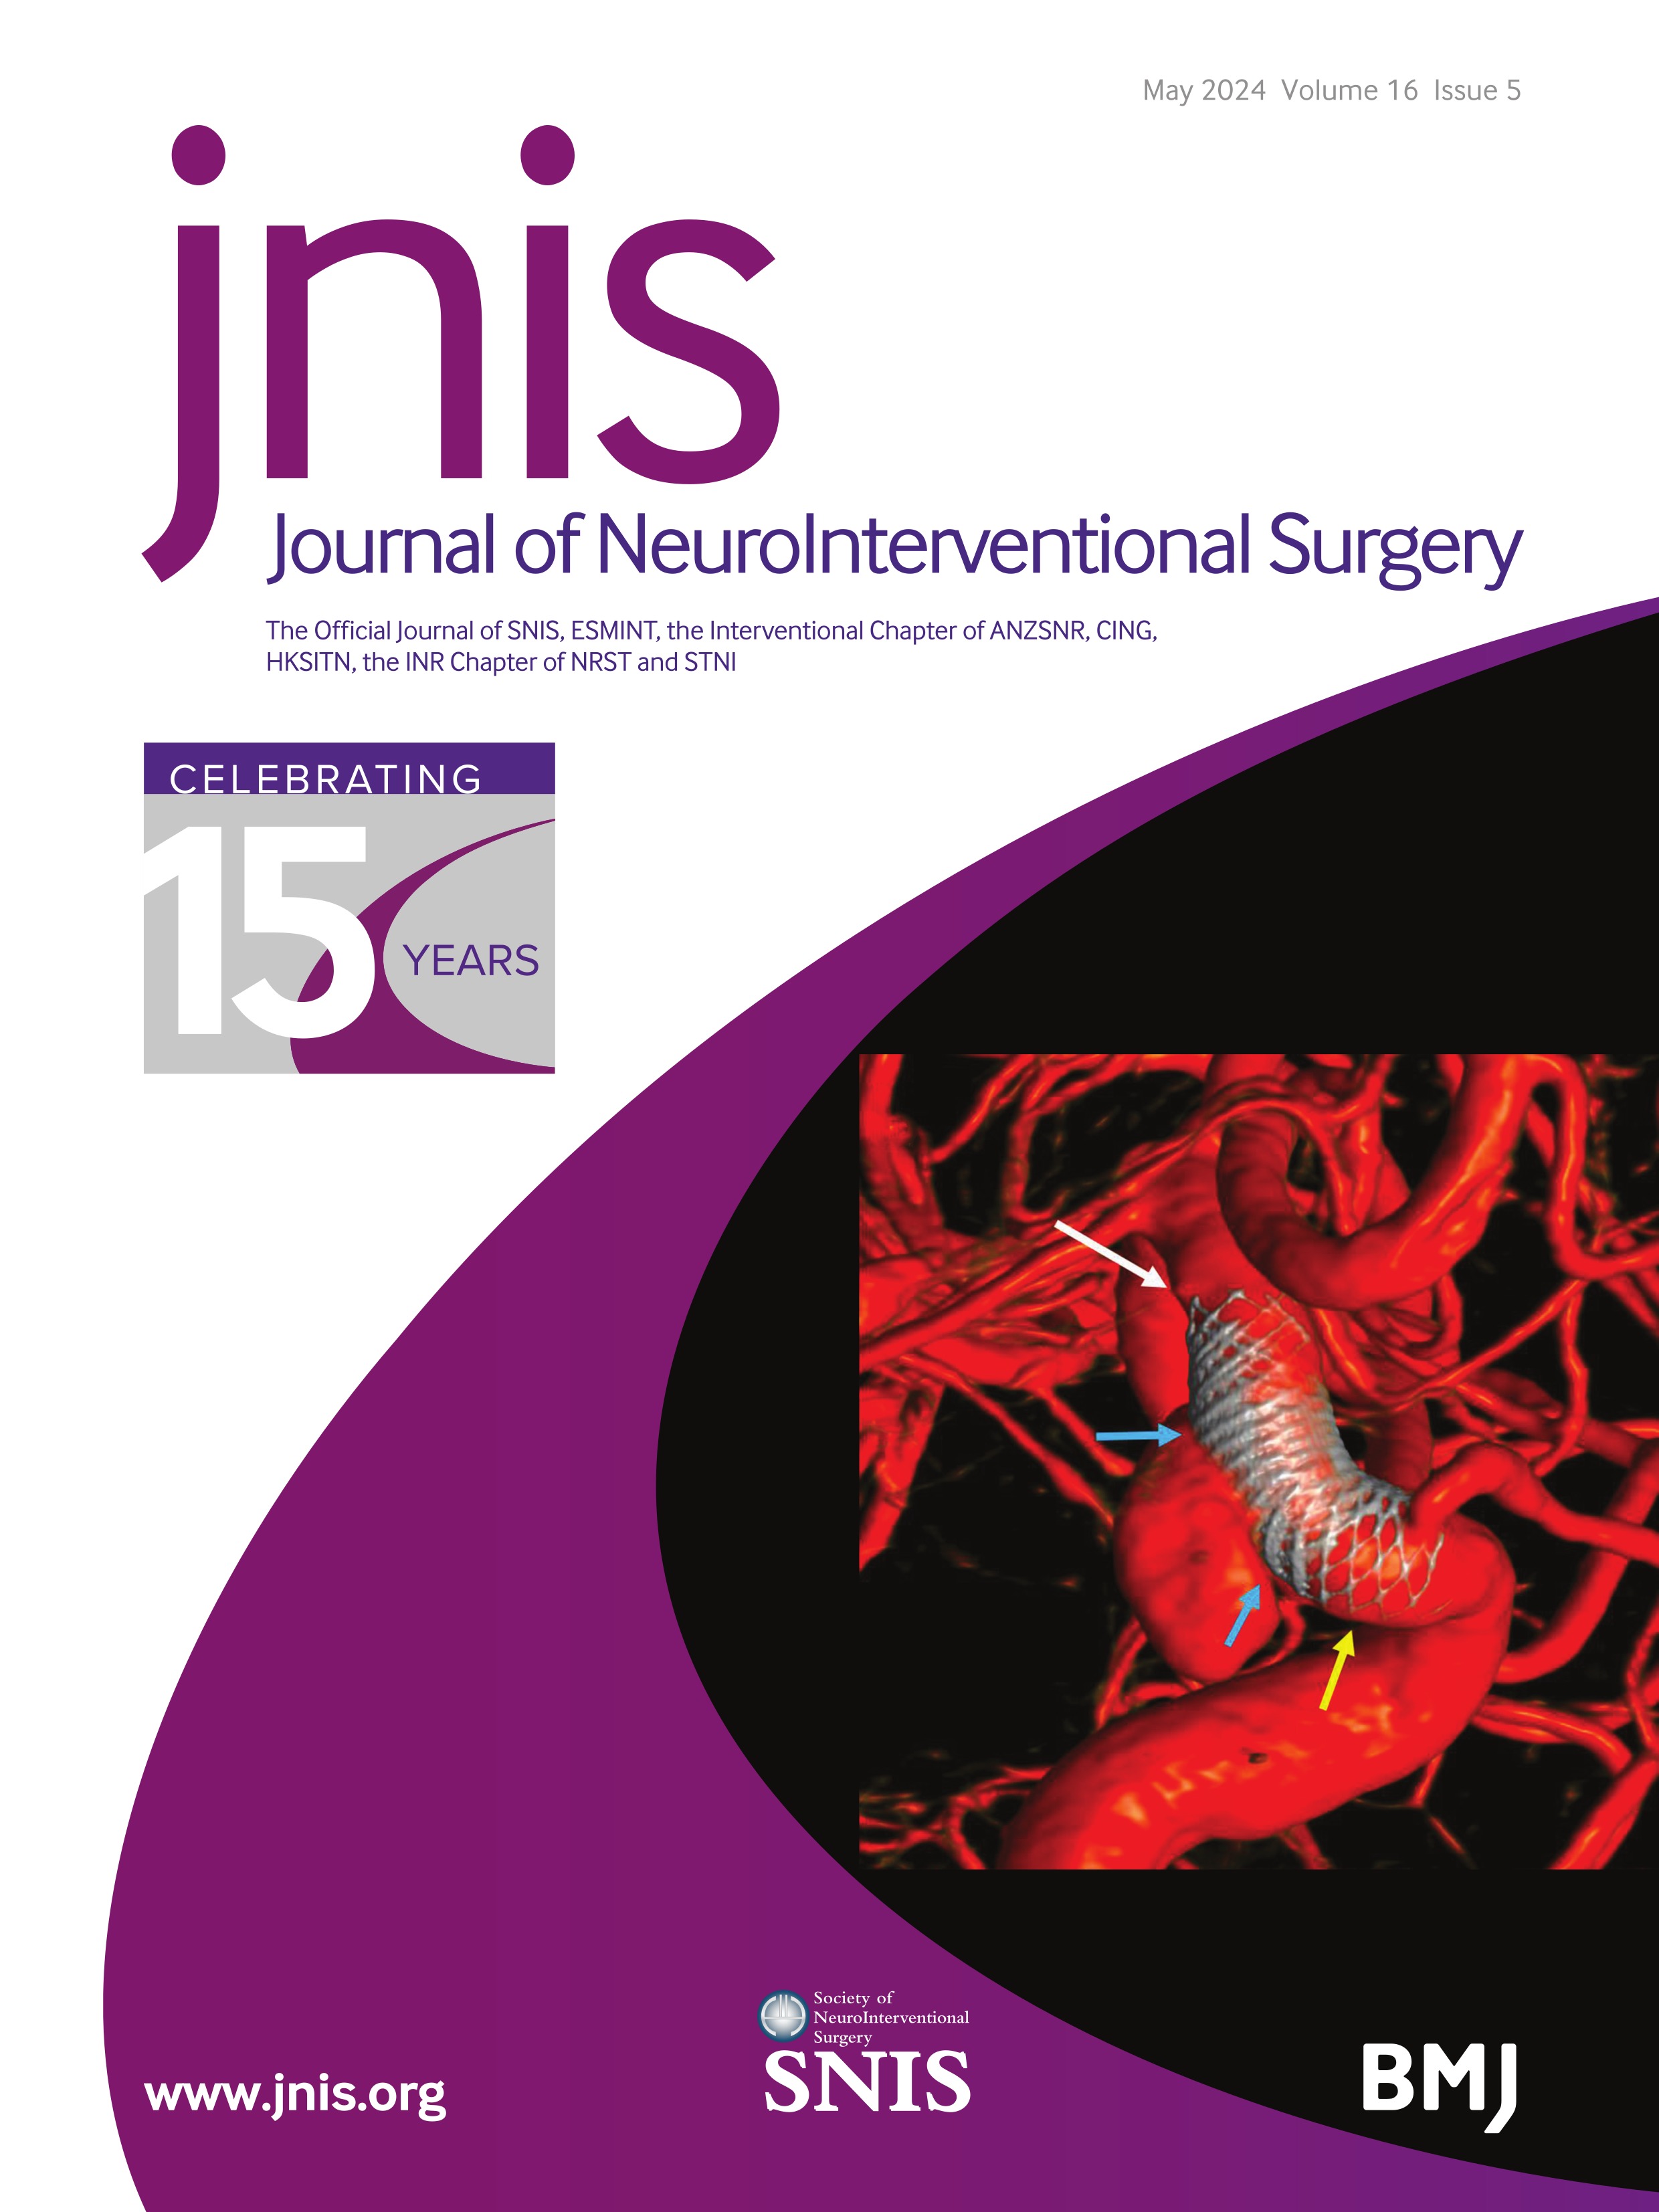 Mechanical thrombectomy in patients with acute ischemic stroke in the USA before and after time window expansion